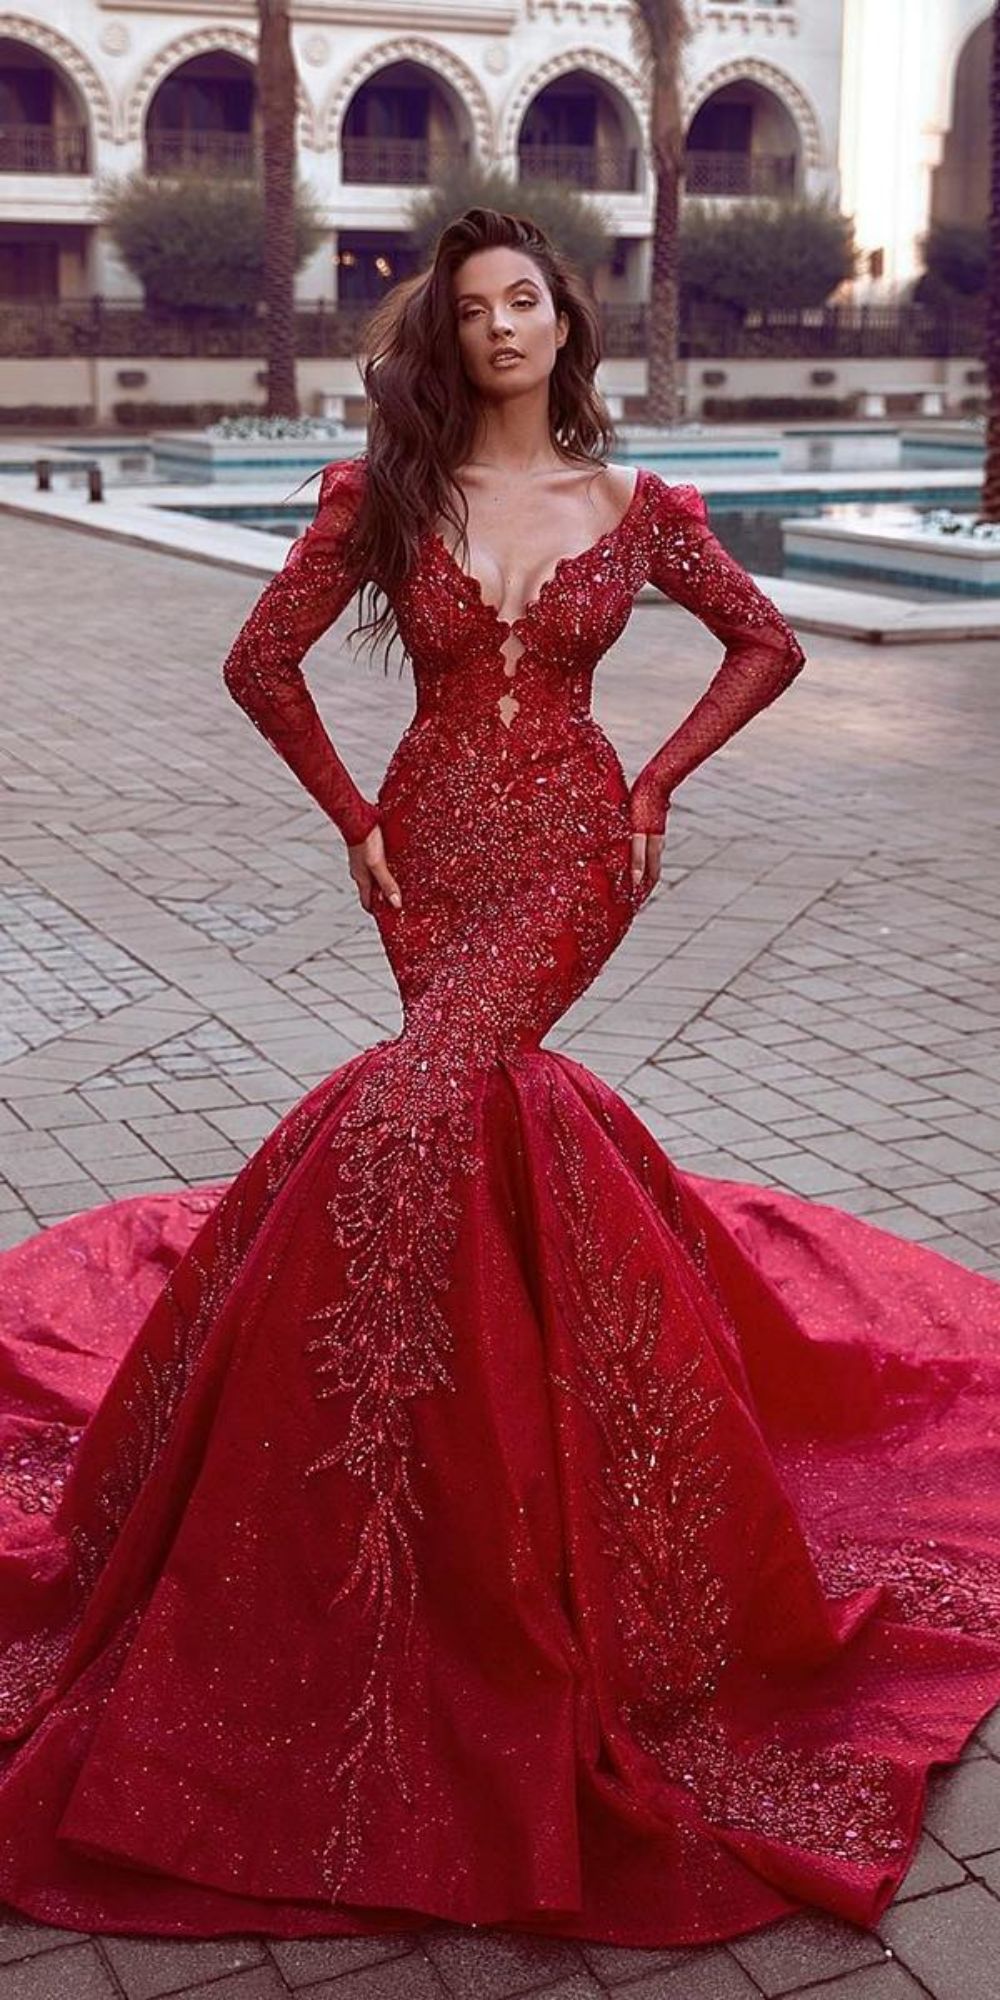 Buy Blood Red Handmade Full-stitched Dress With Intricate Polo Neck and  Sleeves, Pakistani Wedding Gown, Ethnic Bridal Velvet Gown, Gift for Her  Online in India - Etsy